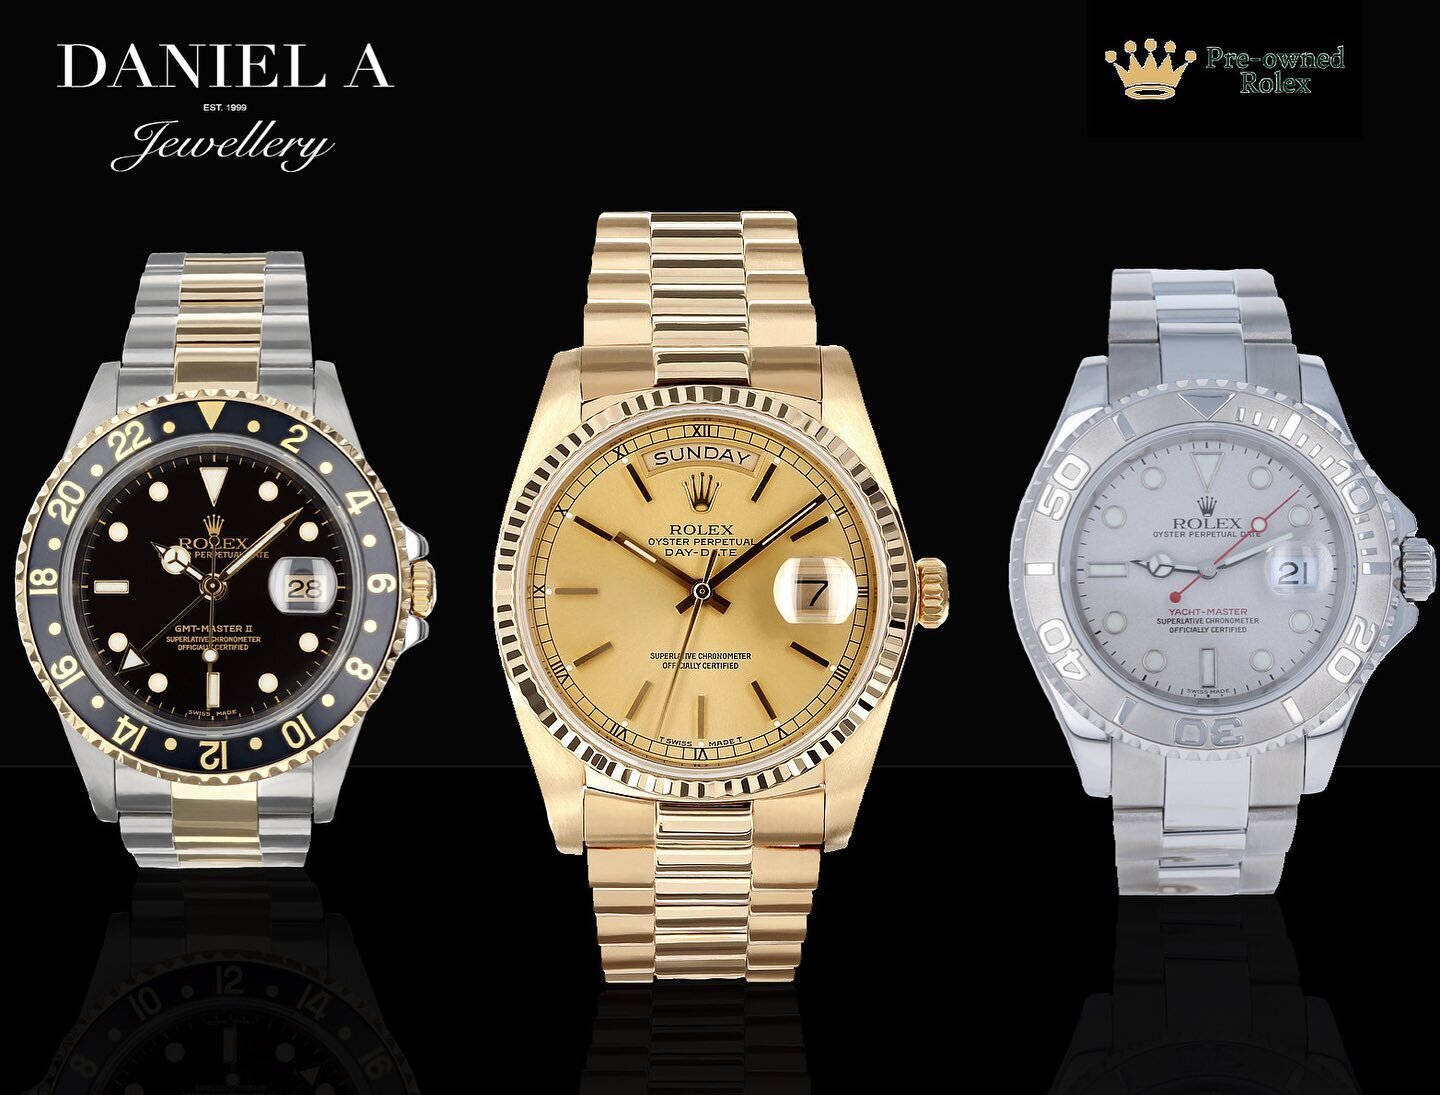 Daniel A. Jewellery is excited to announce that we will be carrying pre-owned ✨Rolex✨ watches. At the fraction of the price, each pre-owned Rolex is Swiss Crown certified. With our wide variety of styles, we have something for everyone! 

Contact us 